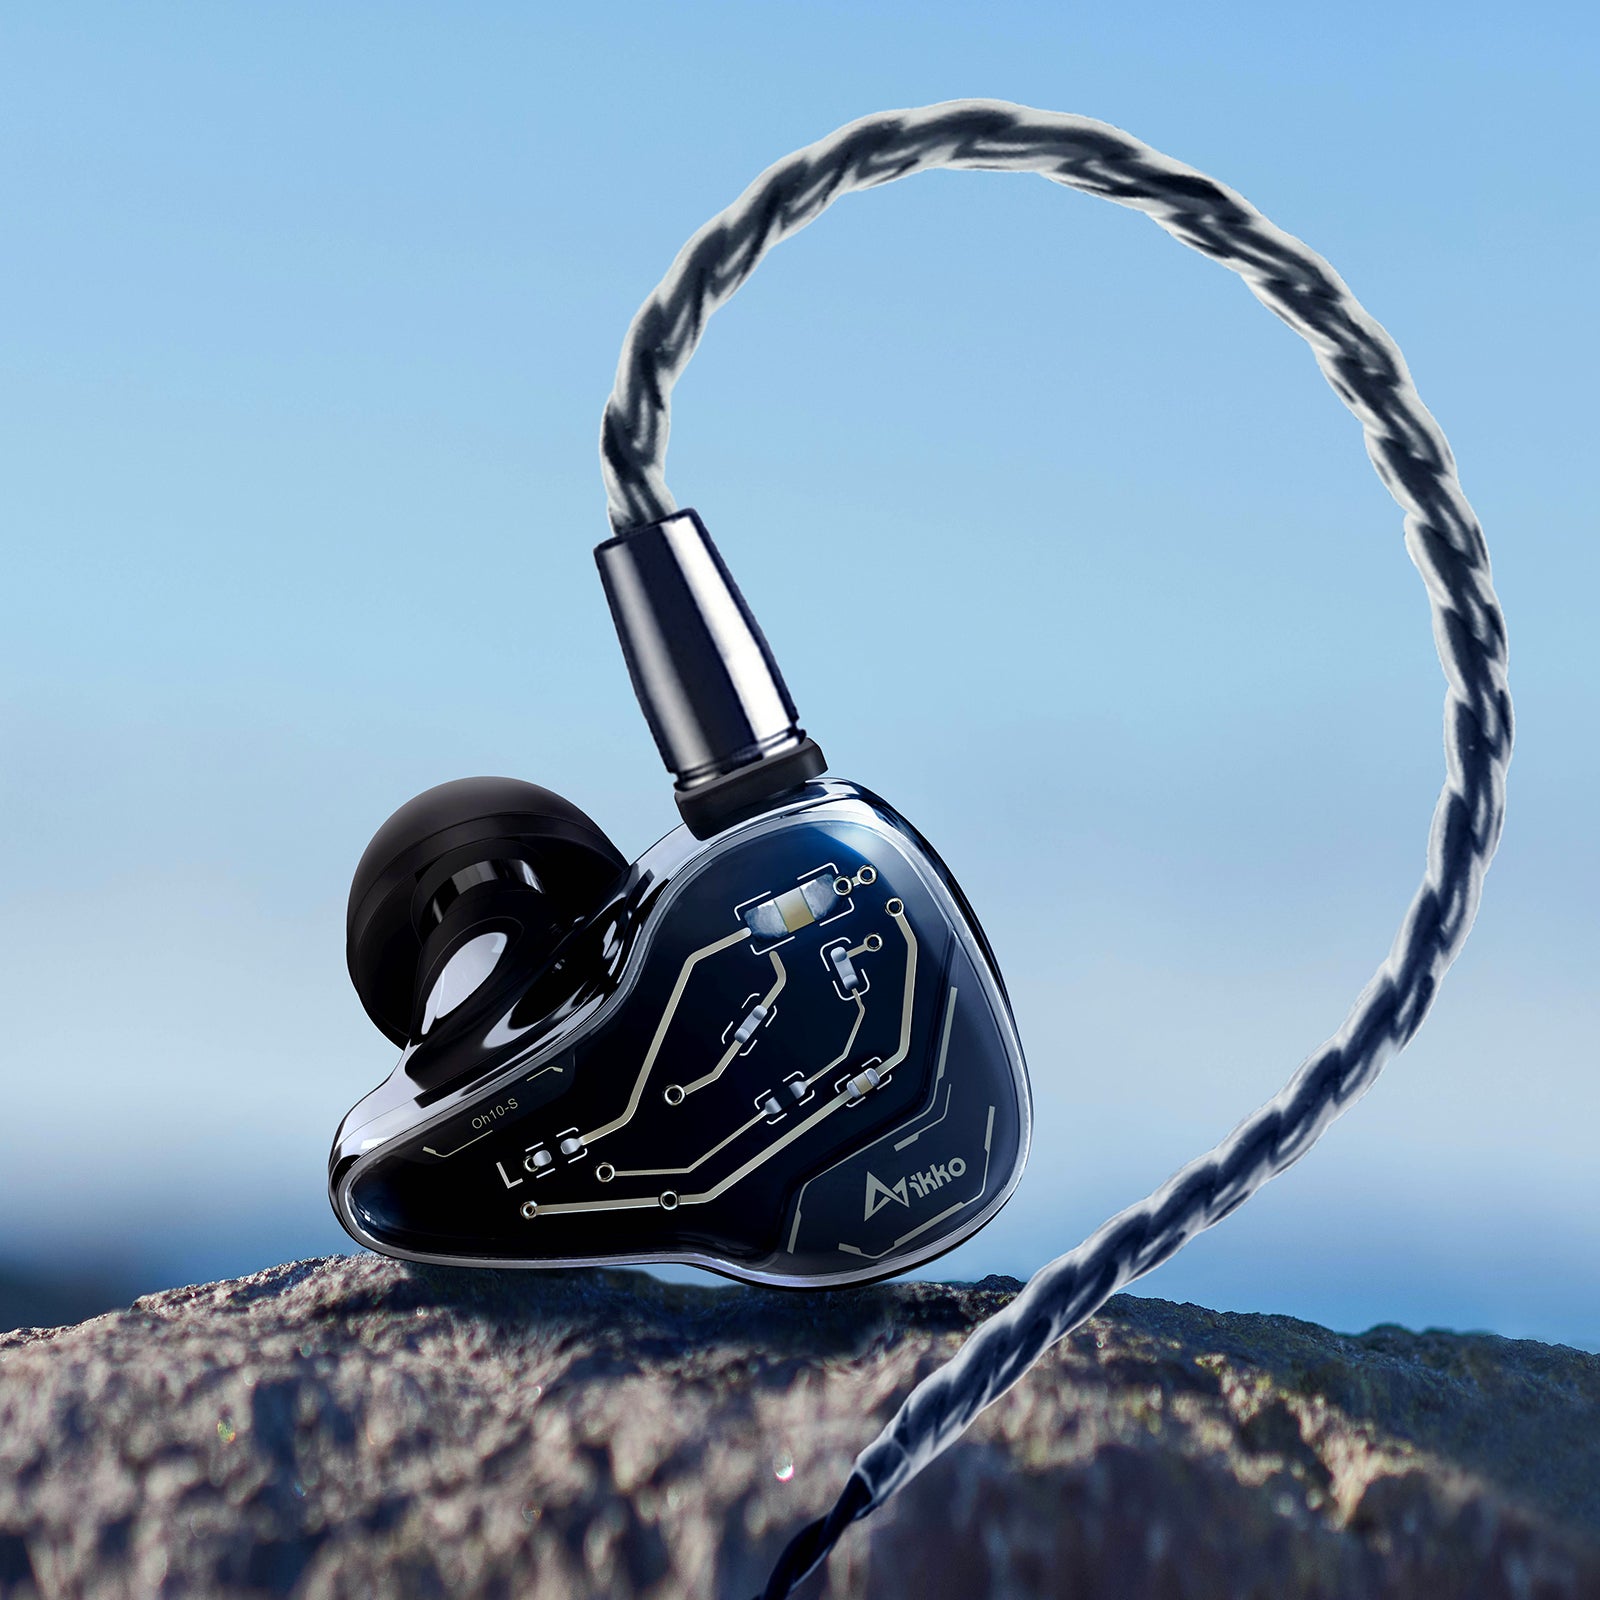 ikko audio Sapphire Mirage OH10S-audio-headphones-earbuds-earphone-music-sound-dynamic-hifi-audiophile-review-ear phone-headset-wired-luxury-high-fidelity